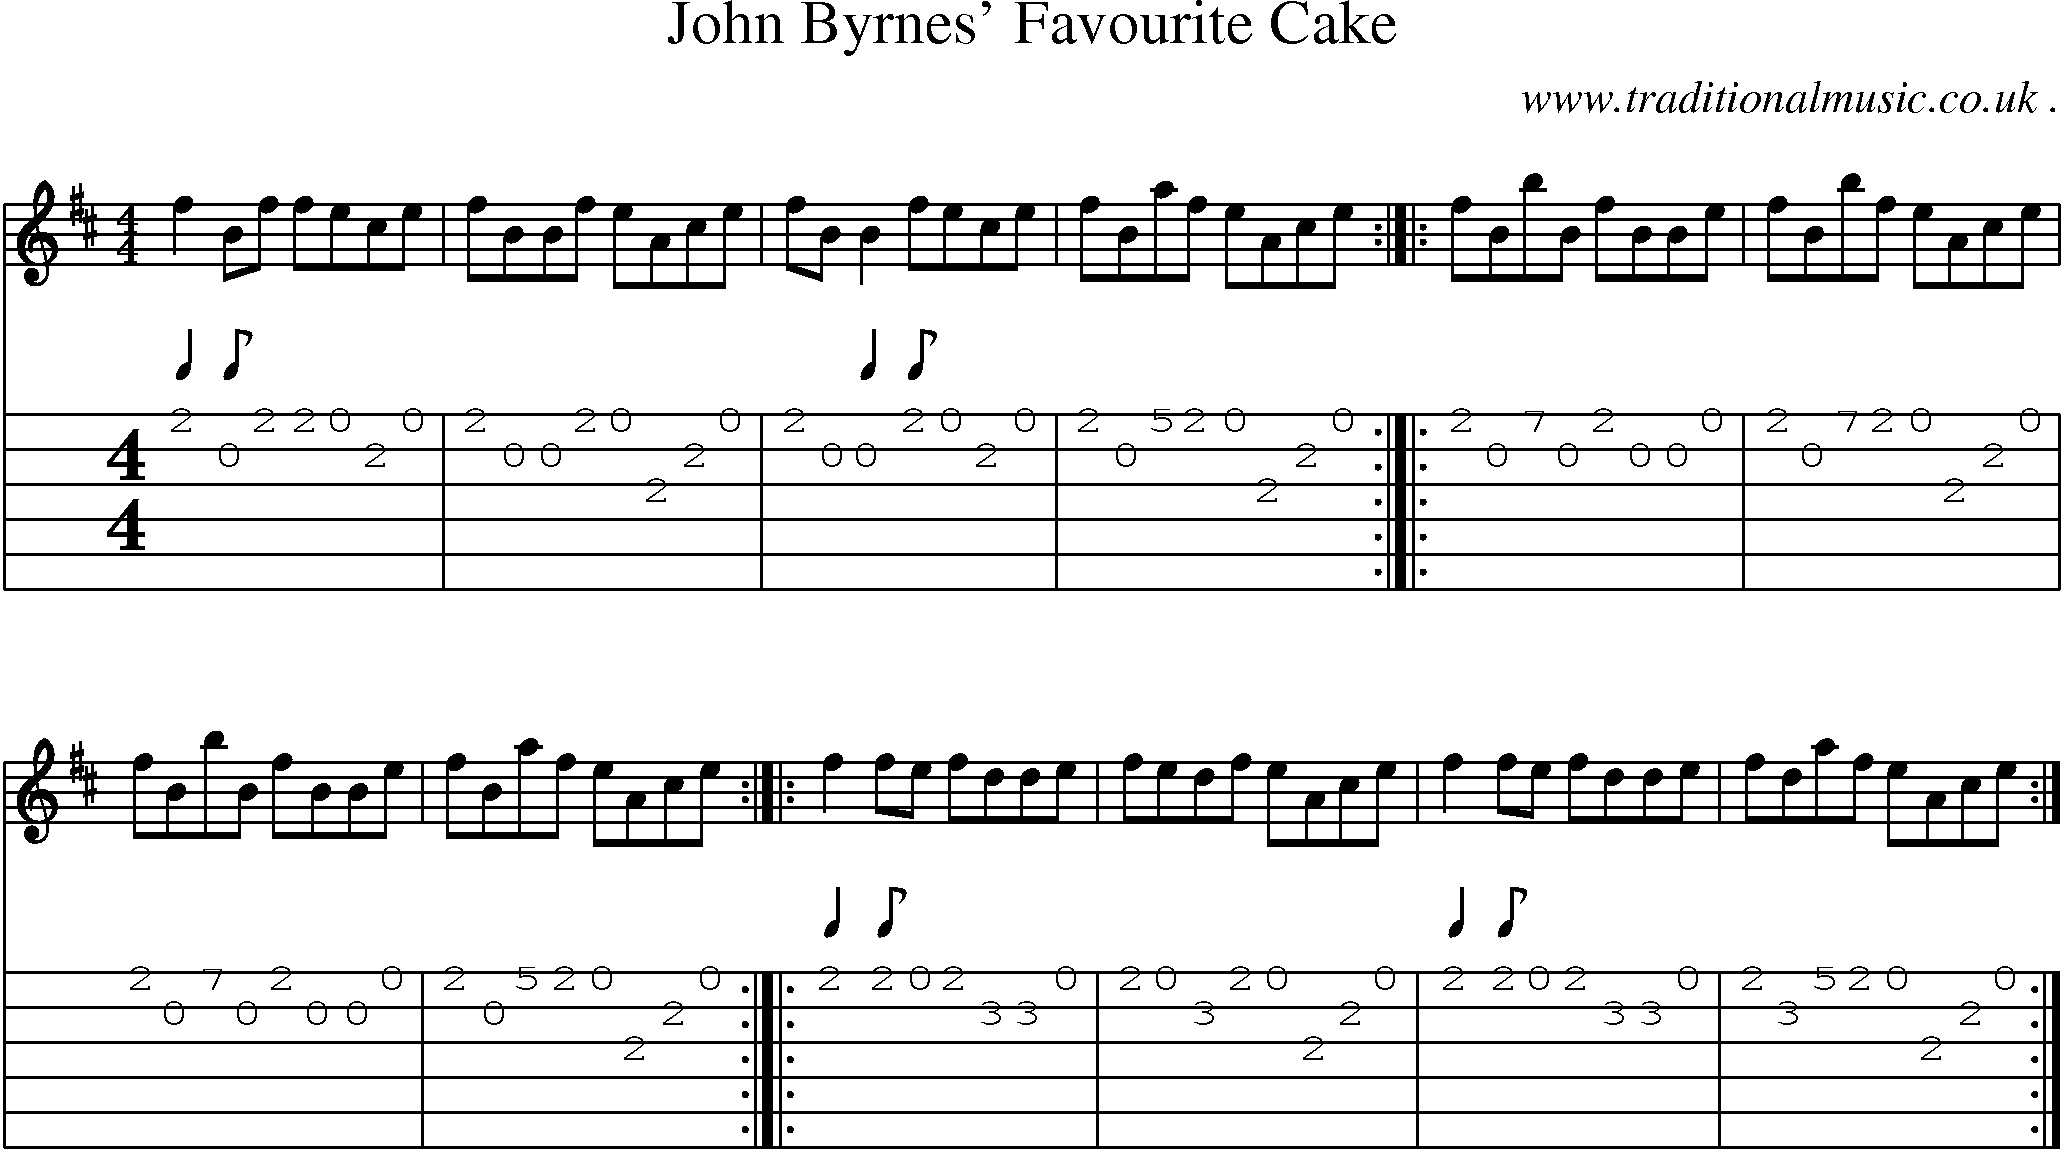 Sheet-Music and Guitar Tabs for John Byrnes Favourite Cake